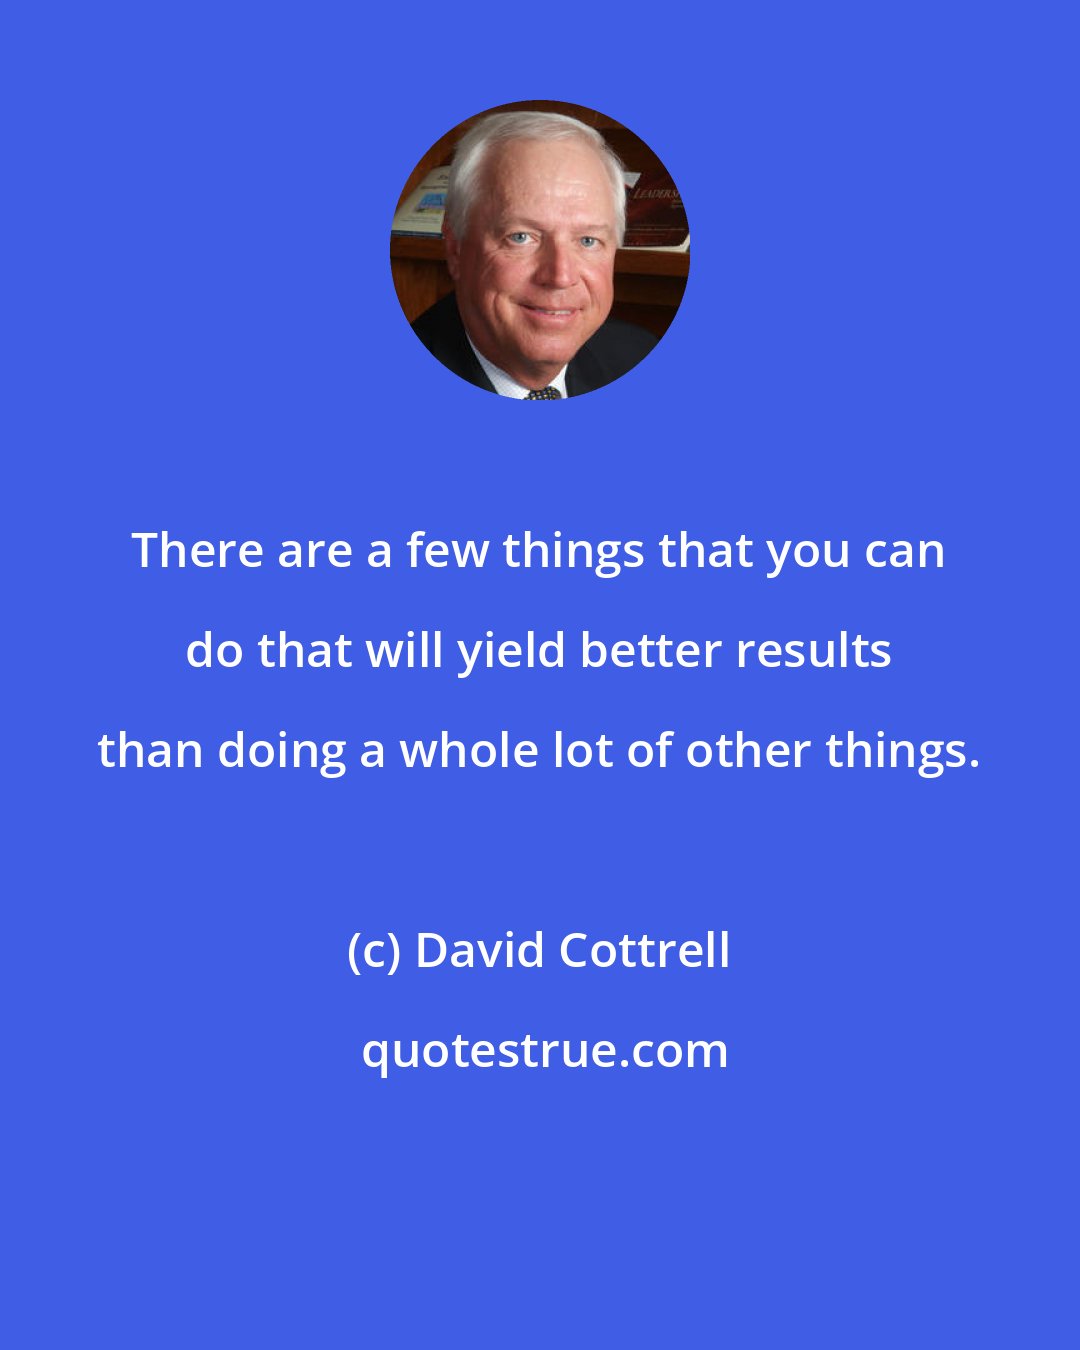 David Cottrell: There are a few things that you can do that will yield better results than doing a whole lot of other things.